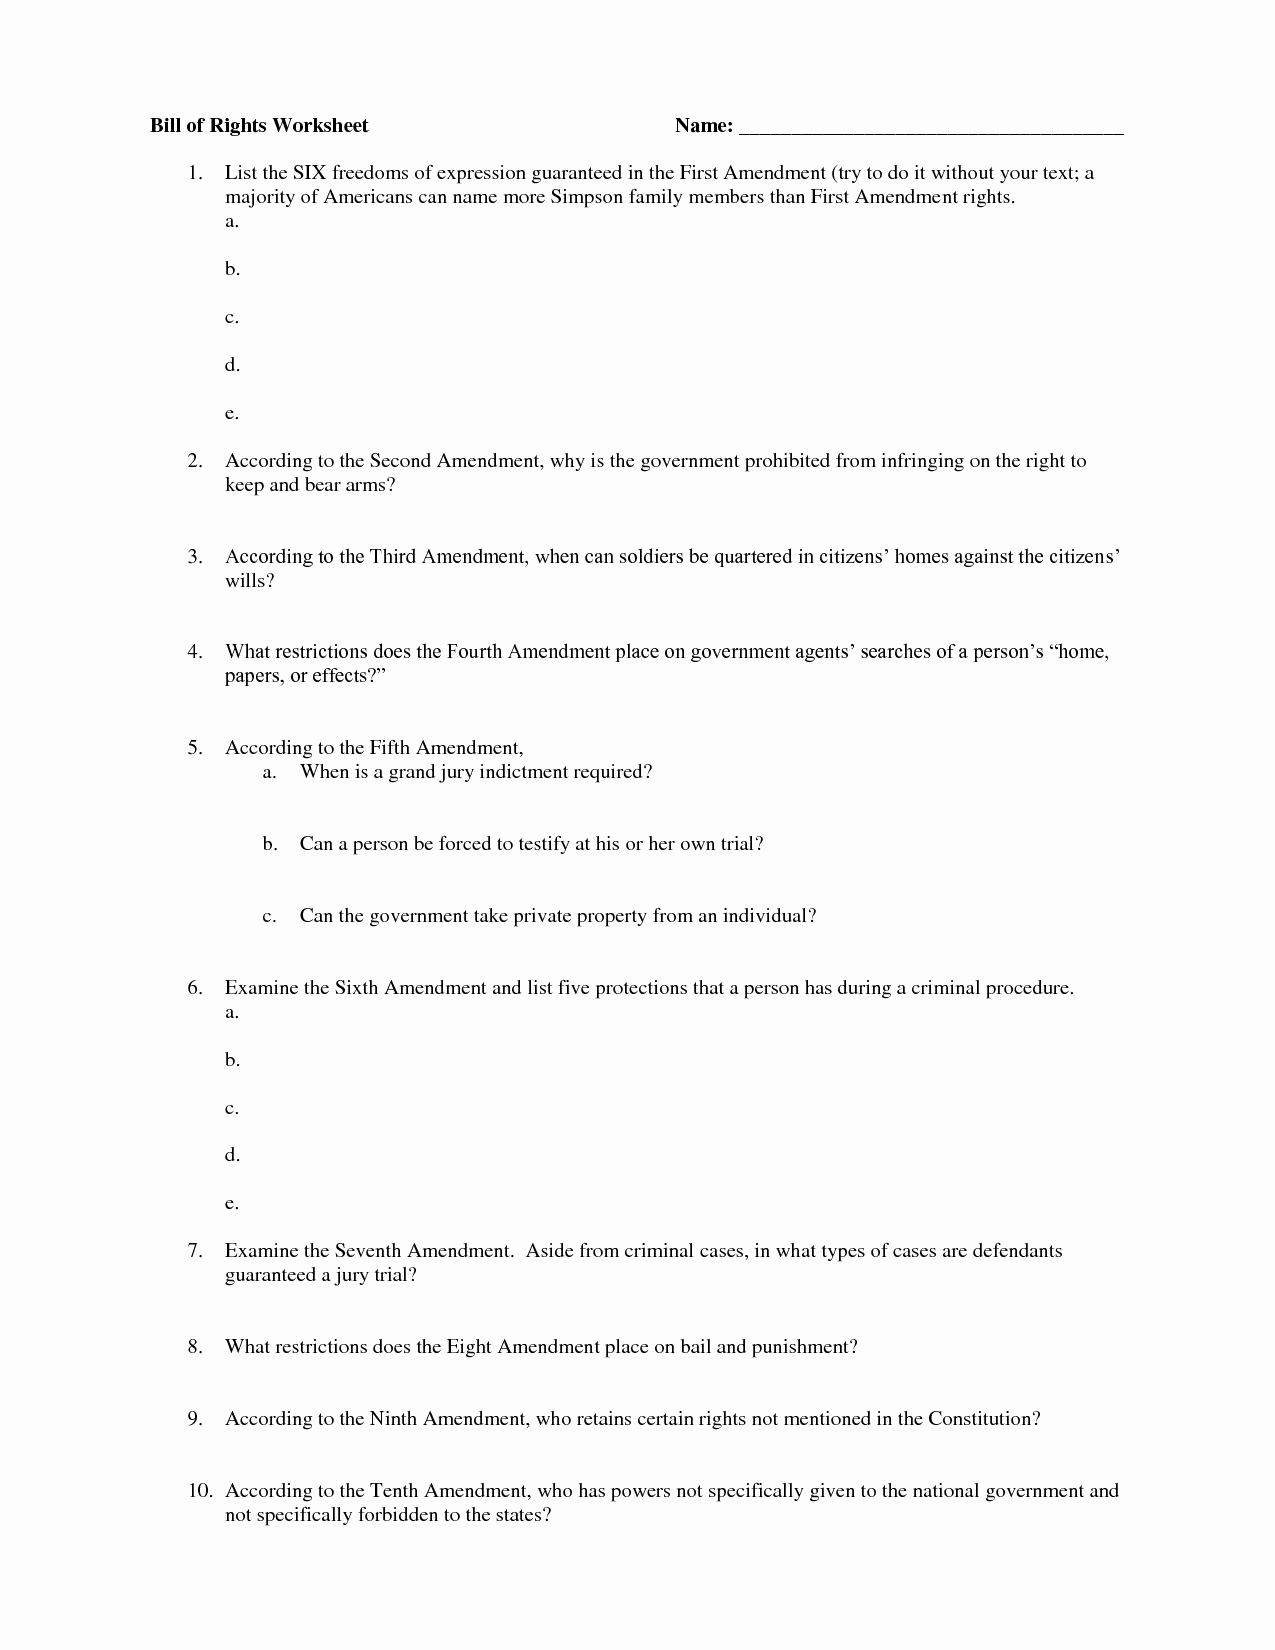 Bill Of Rights Worksheet Answers Luxury 12 Best Of 2nd Amendment Worksheet Second